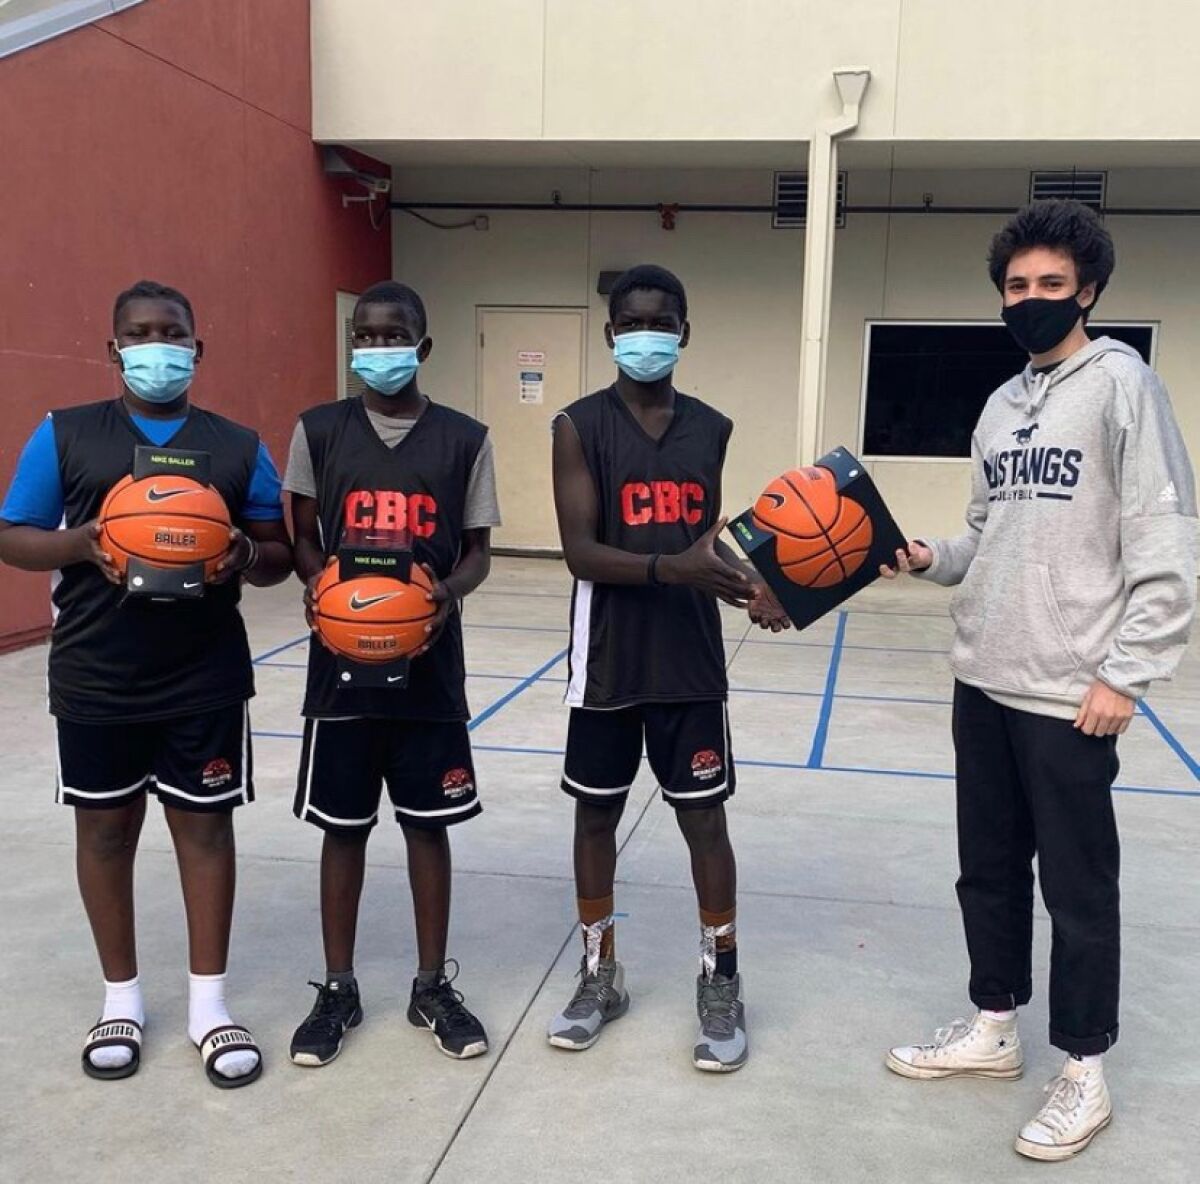 In the fall, San Dieguito student Marco Alvarez was able to donate basketballs to young California Bearcat players.